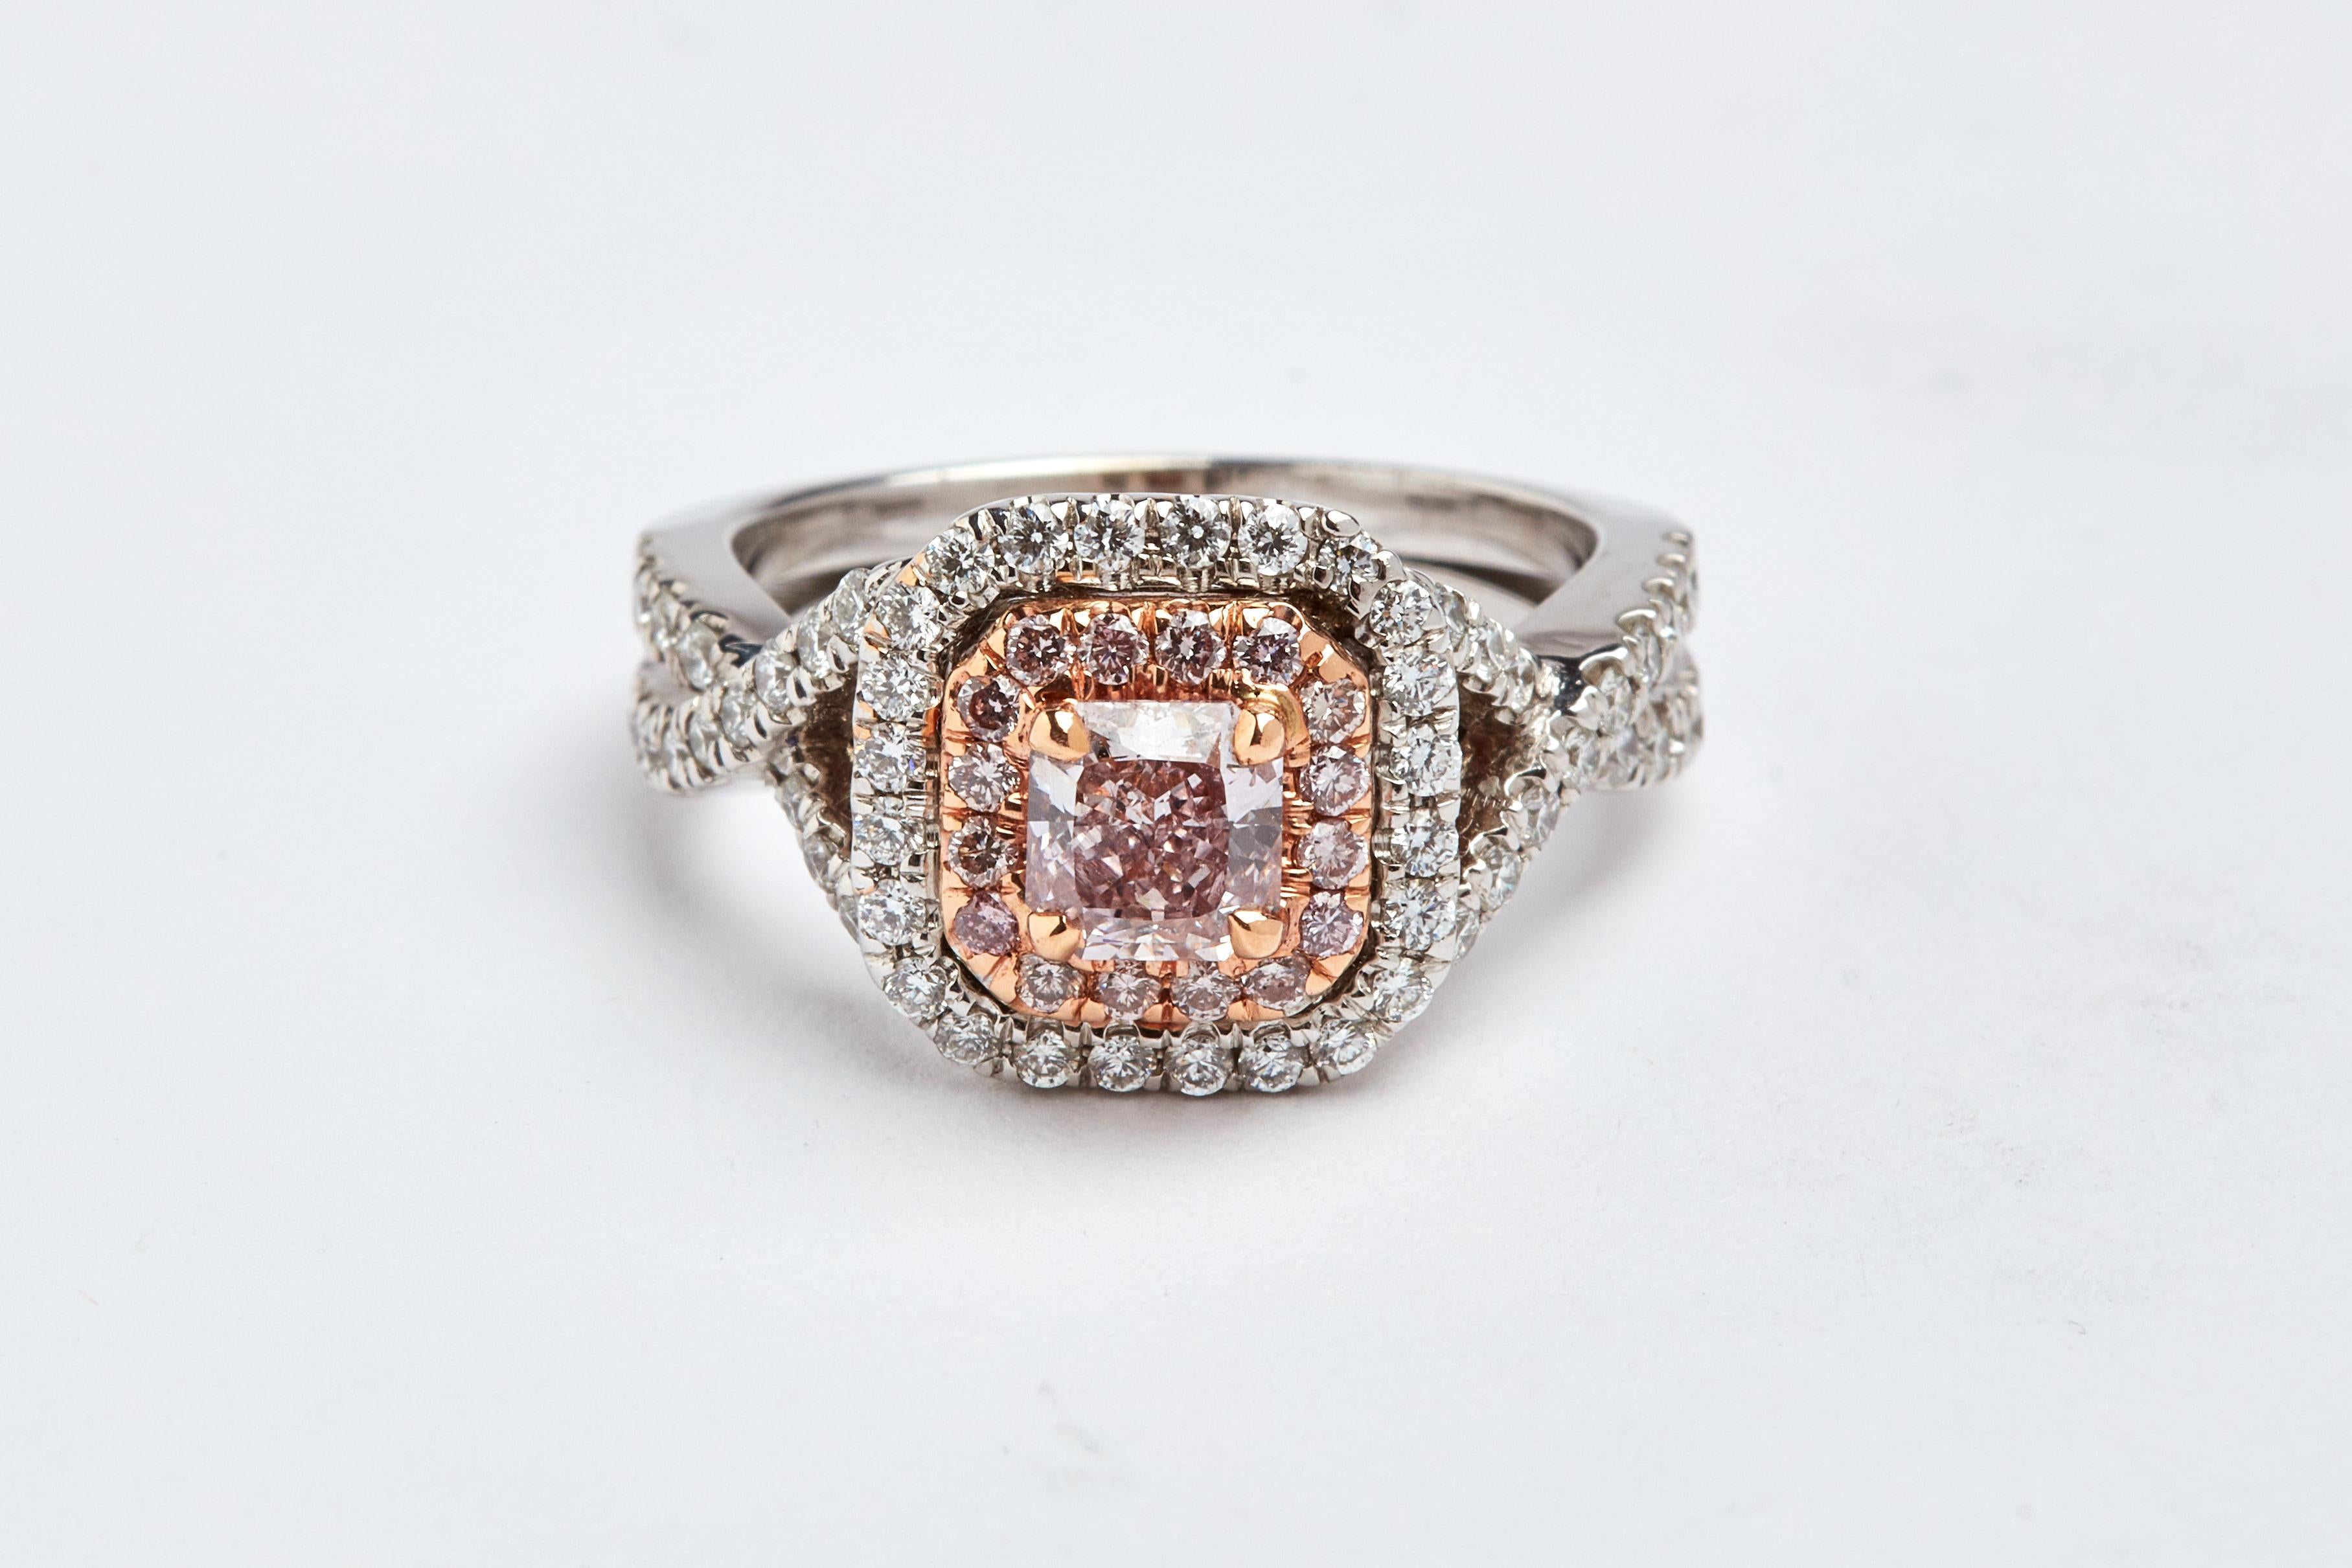 GIA Certified 0.62 carats Natural Brown Pink radiant cut diamond ring. Center stone is 0.62 carats and SI2 clarity.  aprox 0.20 carats in natural pink round stone around the center stone. aprox  0.75 carats of white round diamonds on the setting.